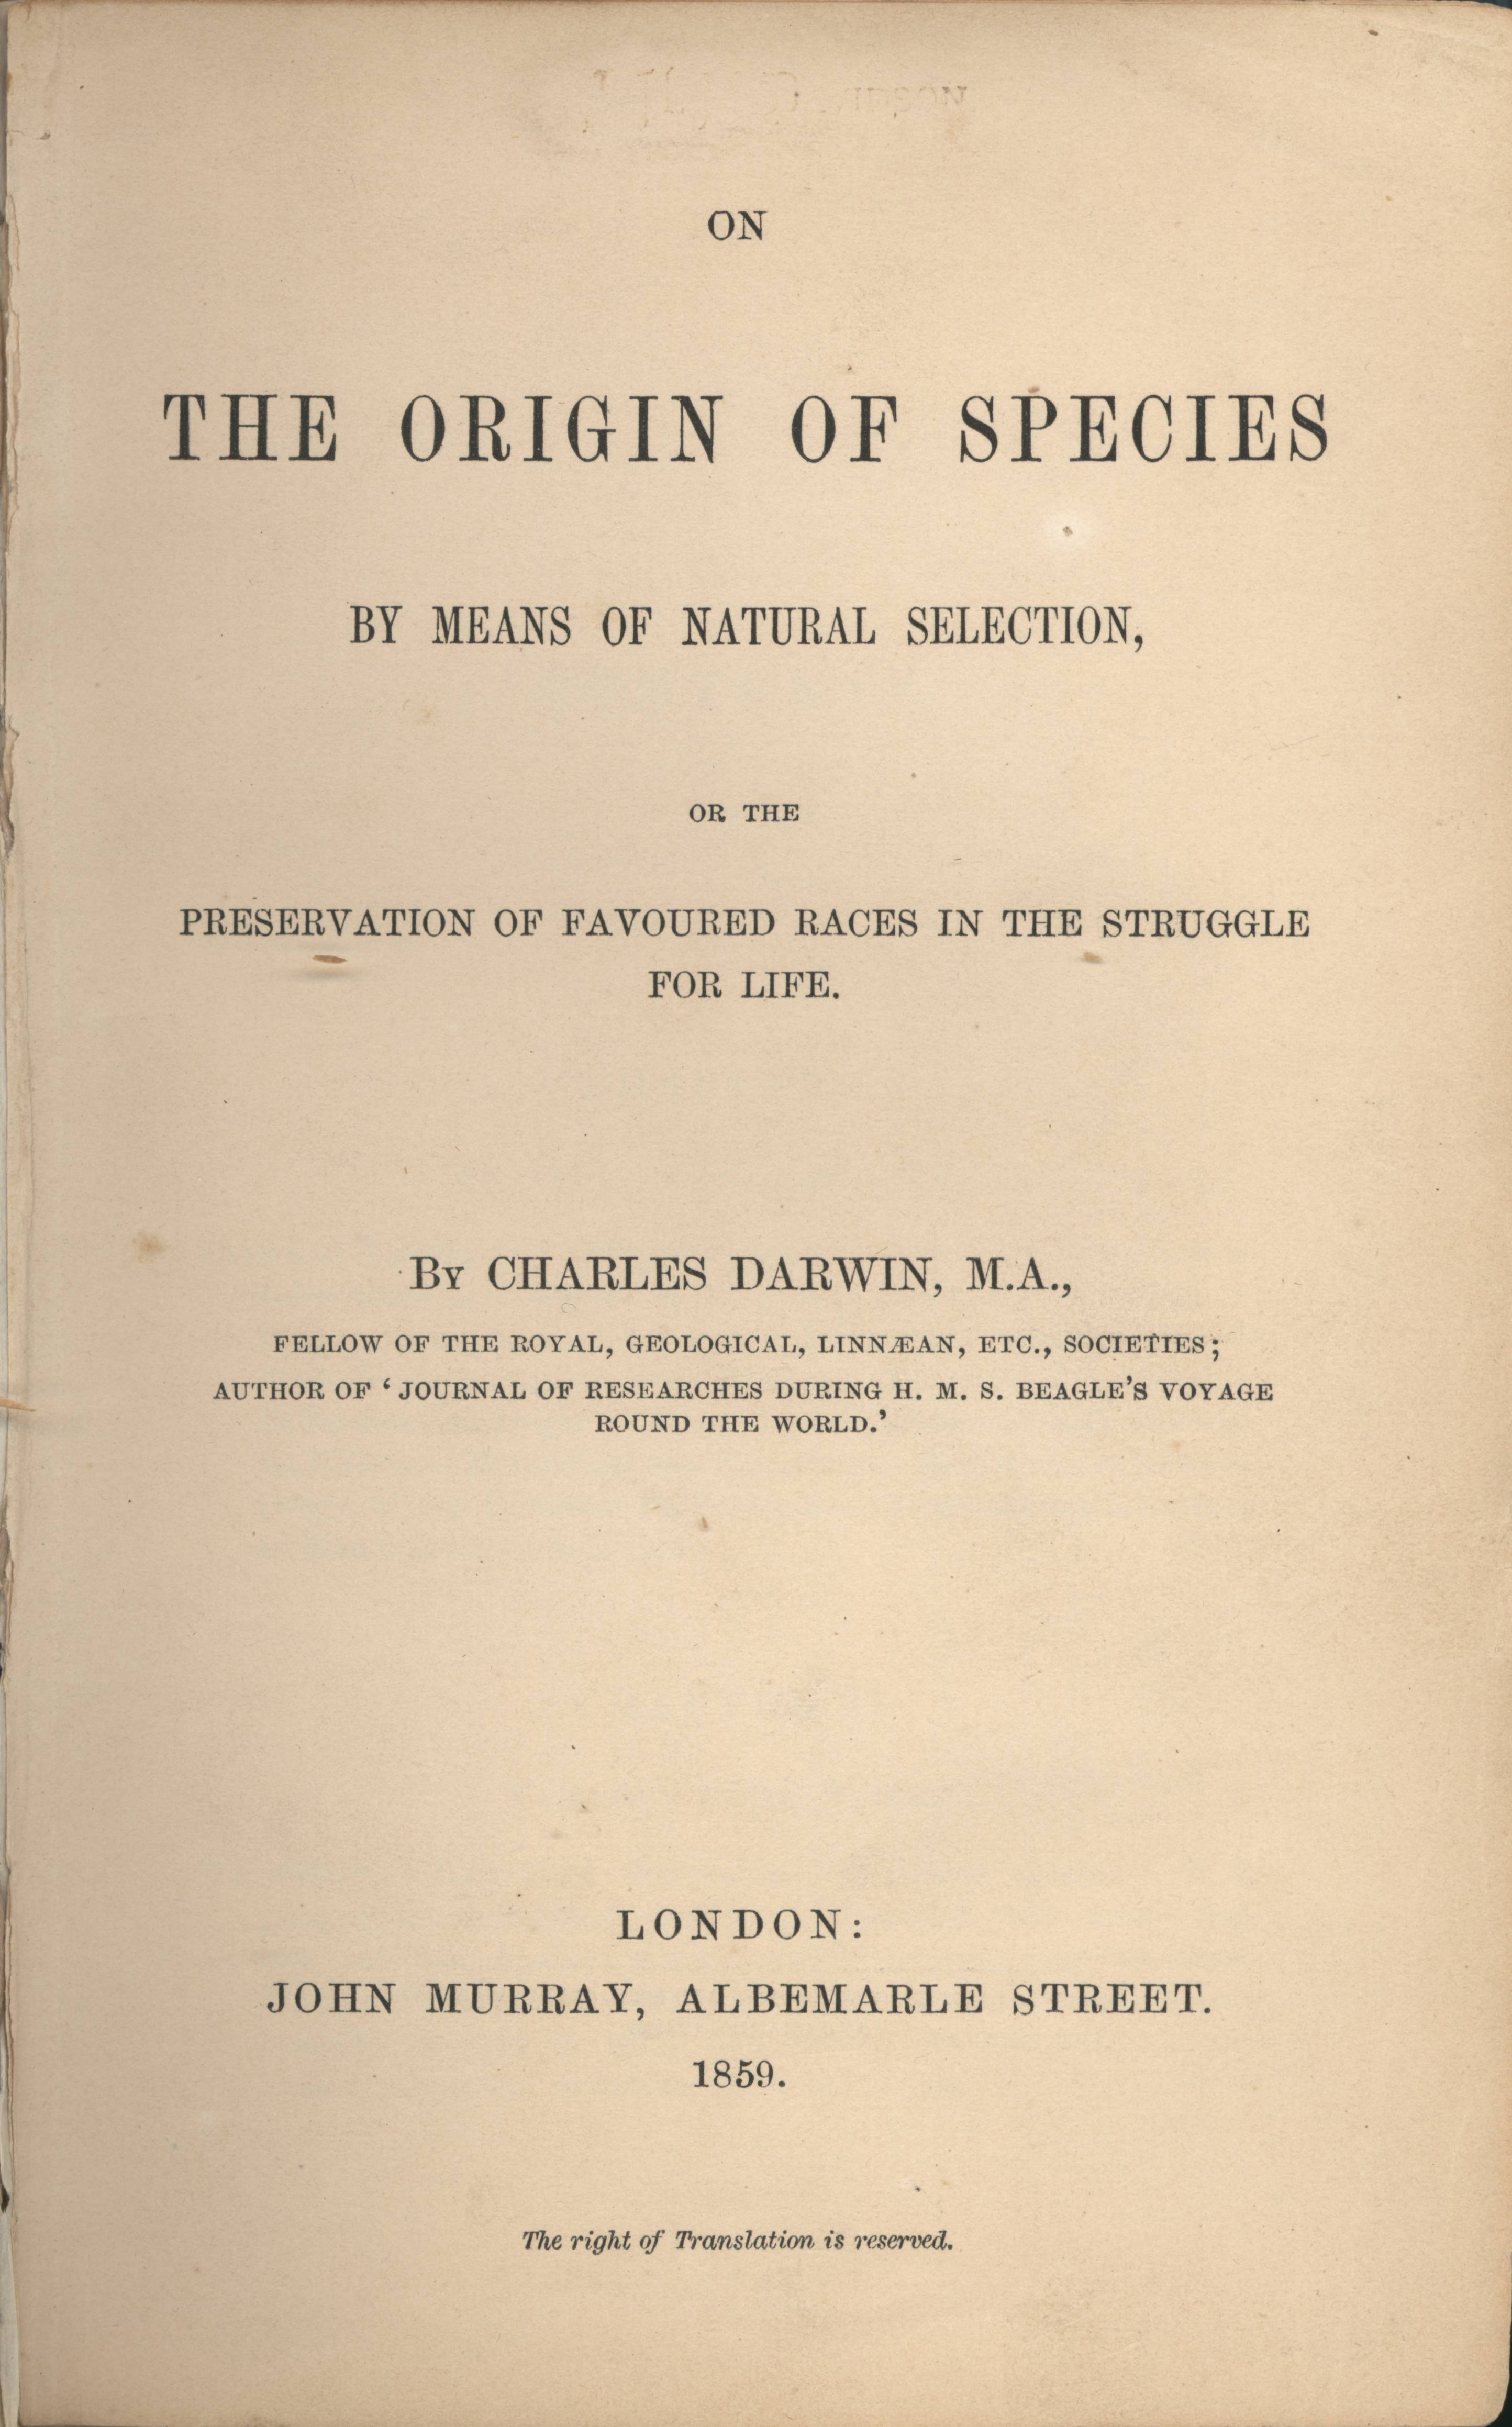 The title page of On the Origin of Species. Image from WikimediaCommons.